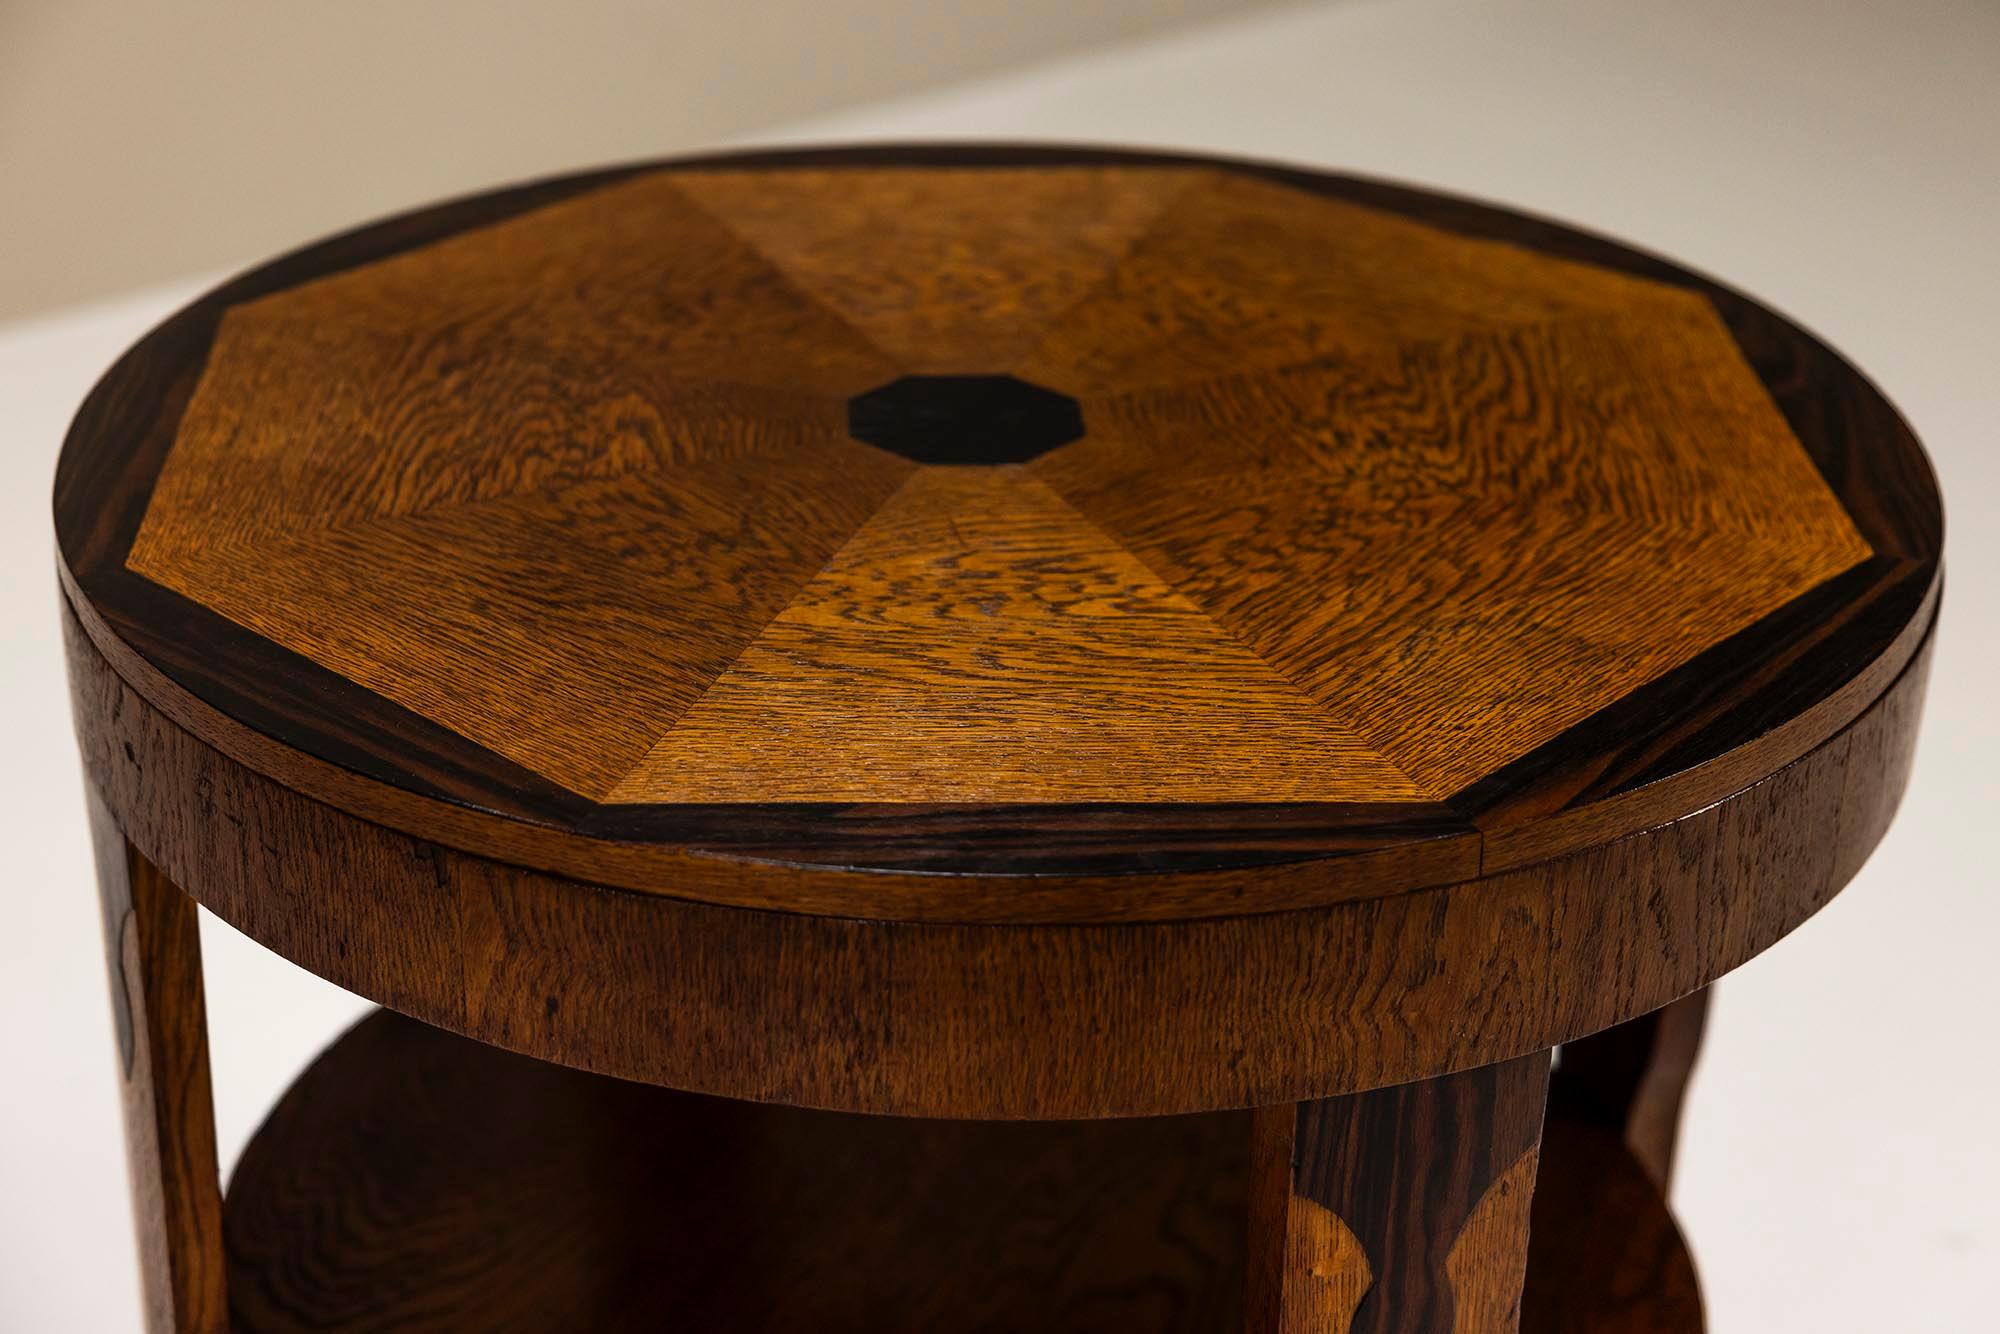 Mid-20th Century Amsterdam School Coffee Table in Oak and Coromandel Details, 1930s For Sale